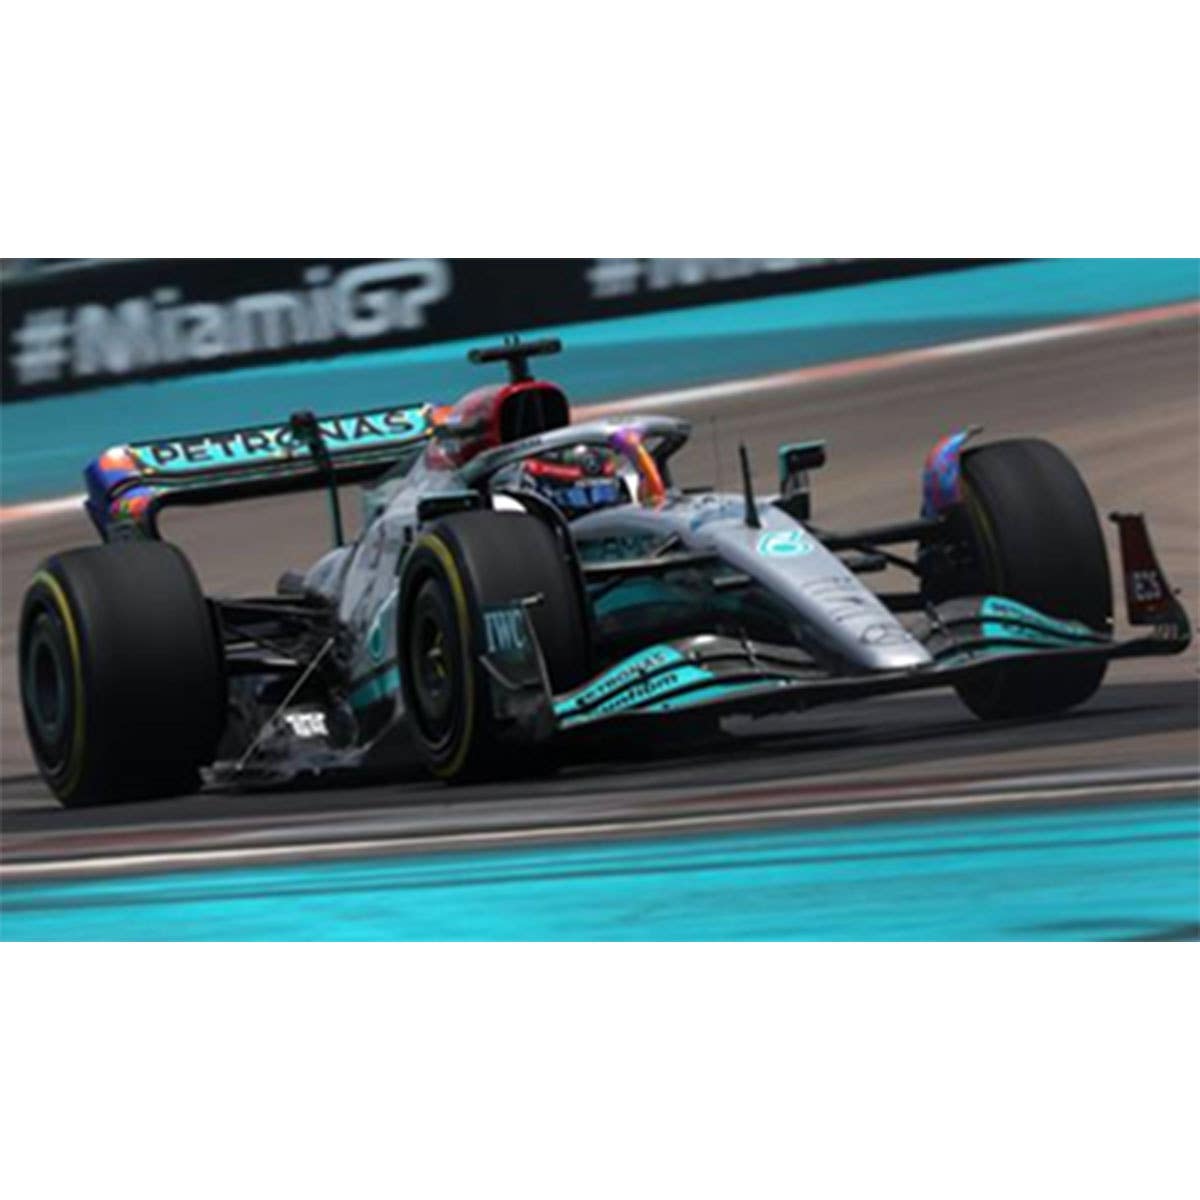 Mercedes-AMG Petronas F1 W13 E Performance No.63 Mercedes-AMG Petronas F1 Team - Miami GP 2022 - George Russell.  With Acrylic Cover - 1:18 Scale Resin Model Car